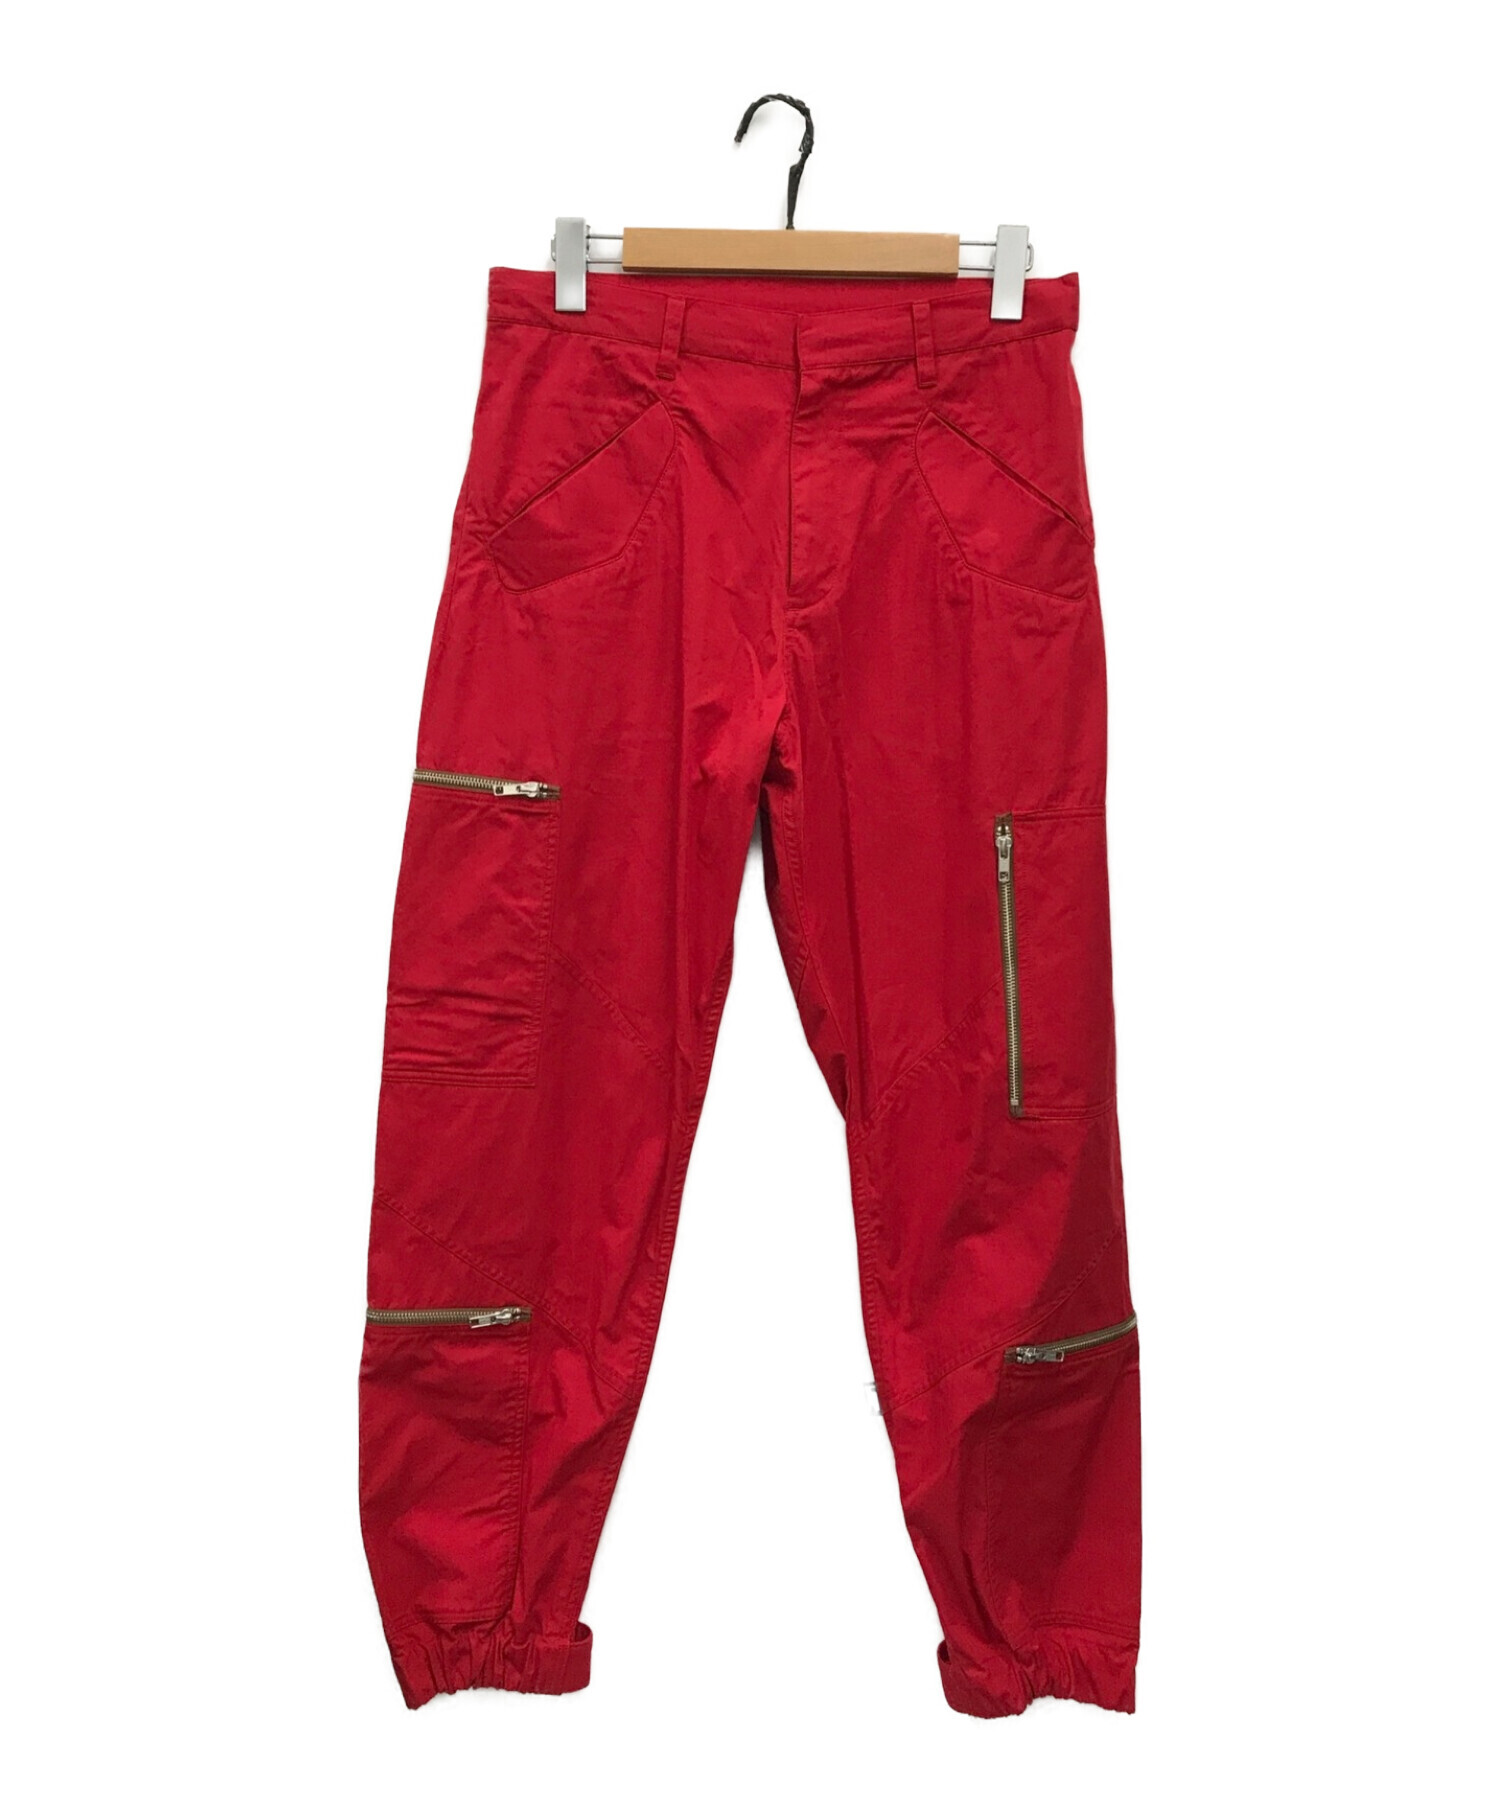 PHINGERIN 21AW PLOWING PANTS